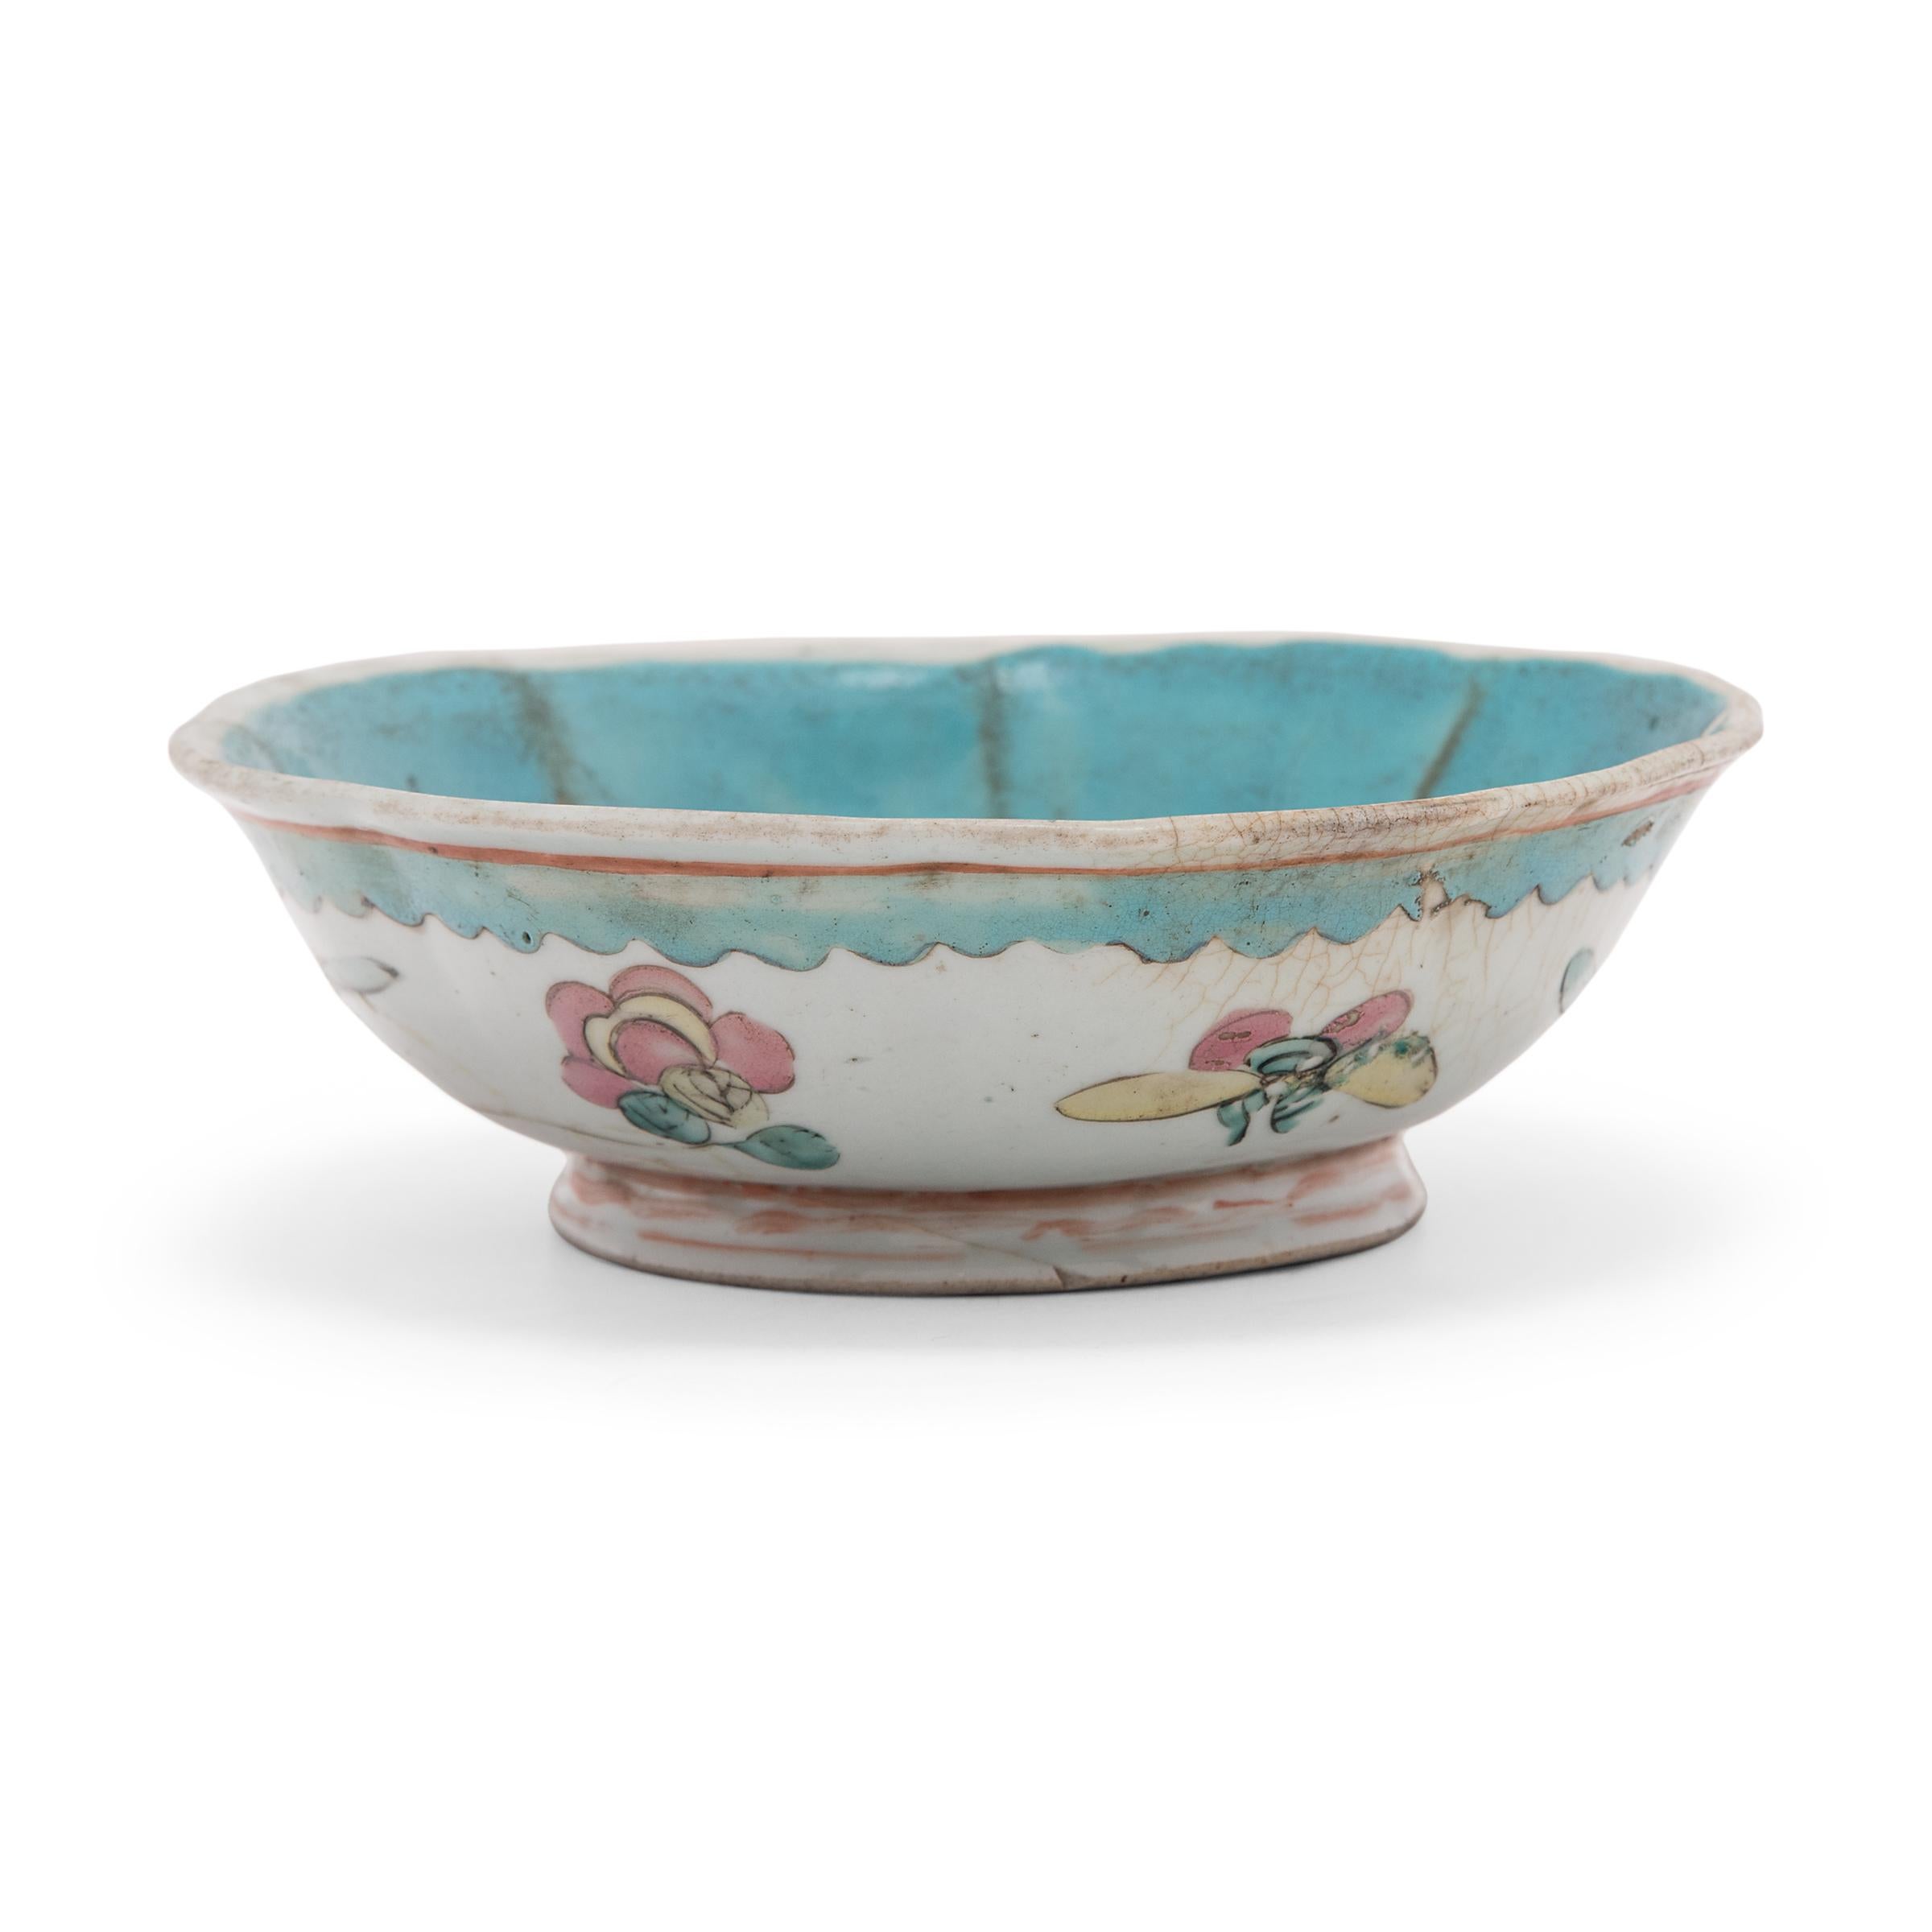 Enameled Chinese Floral Offering Bowl, c. 1850